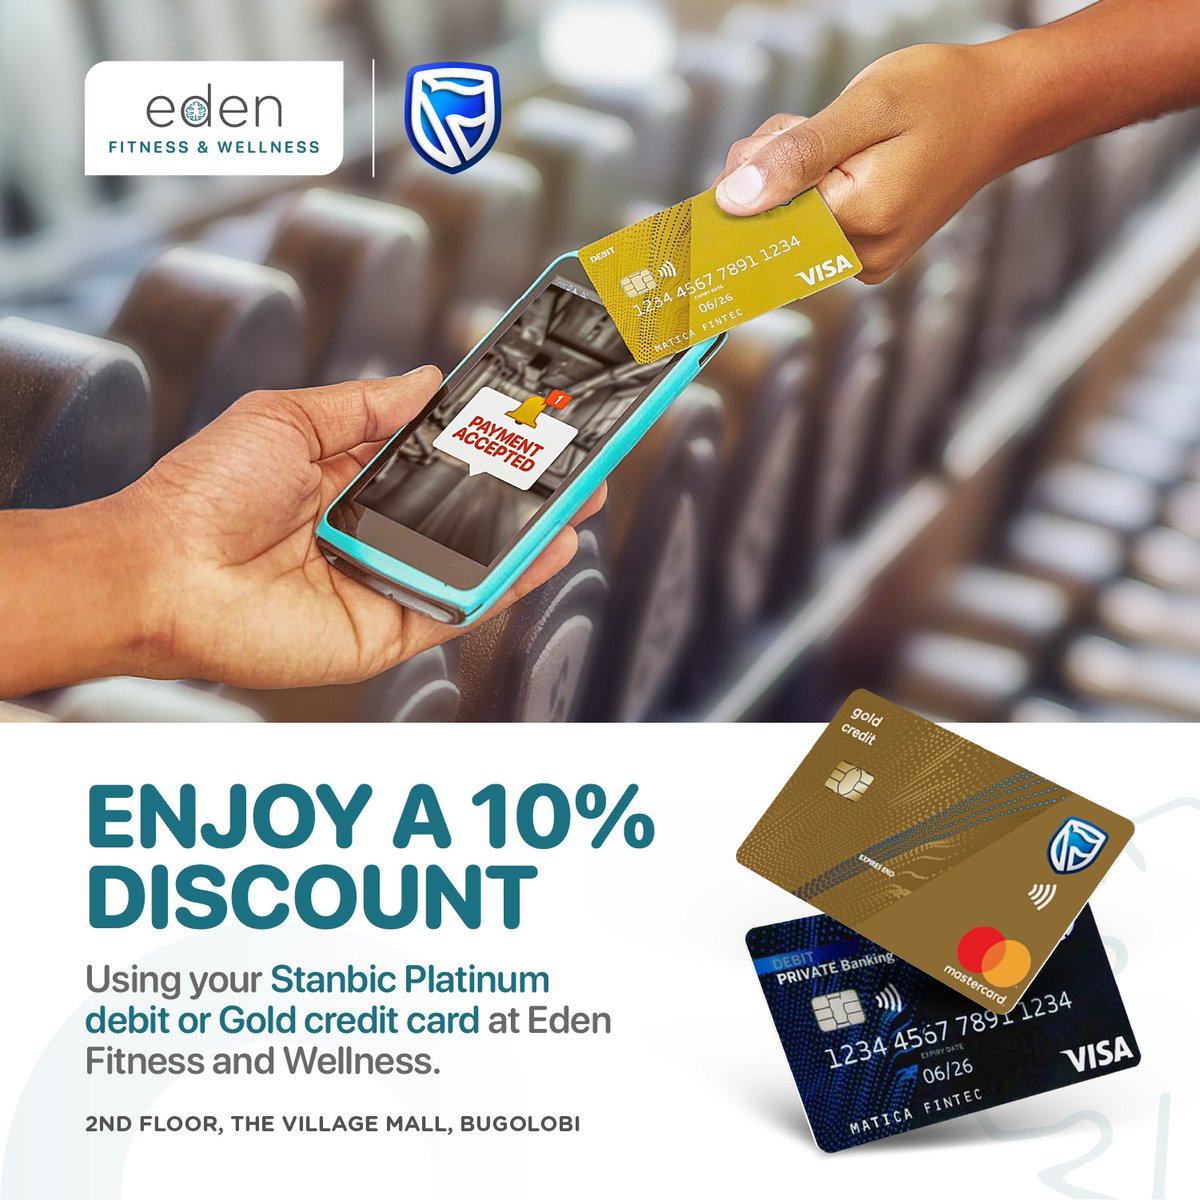 Make payment with your @stanbicug Platinum debit or Gold credit card at Eden Fitness & Wellness and enjoy a 10% Discount.
#gymclasses
#edengym #NewYearBetterYou
#kampala #Uganda